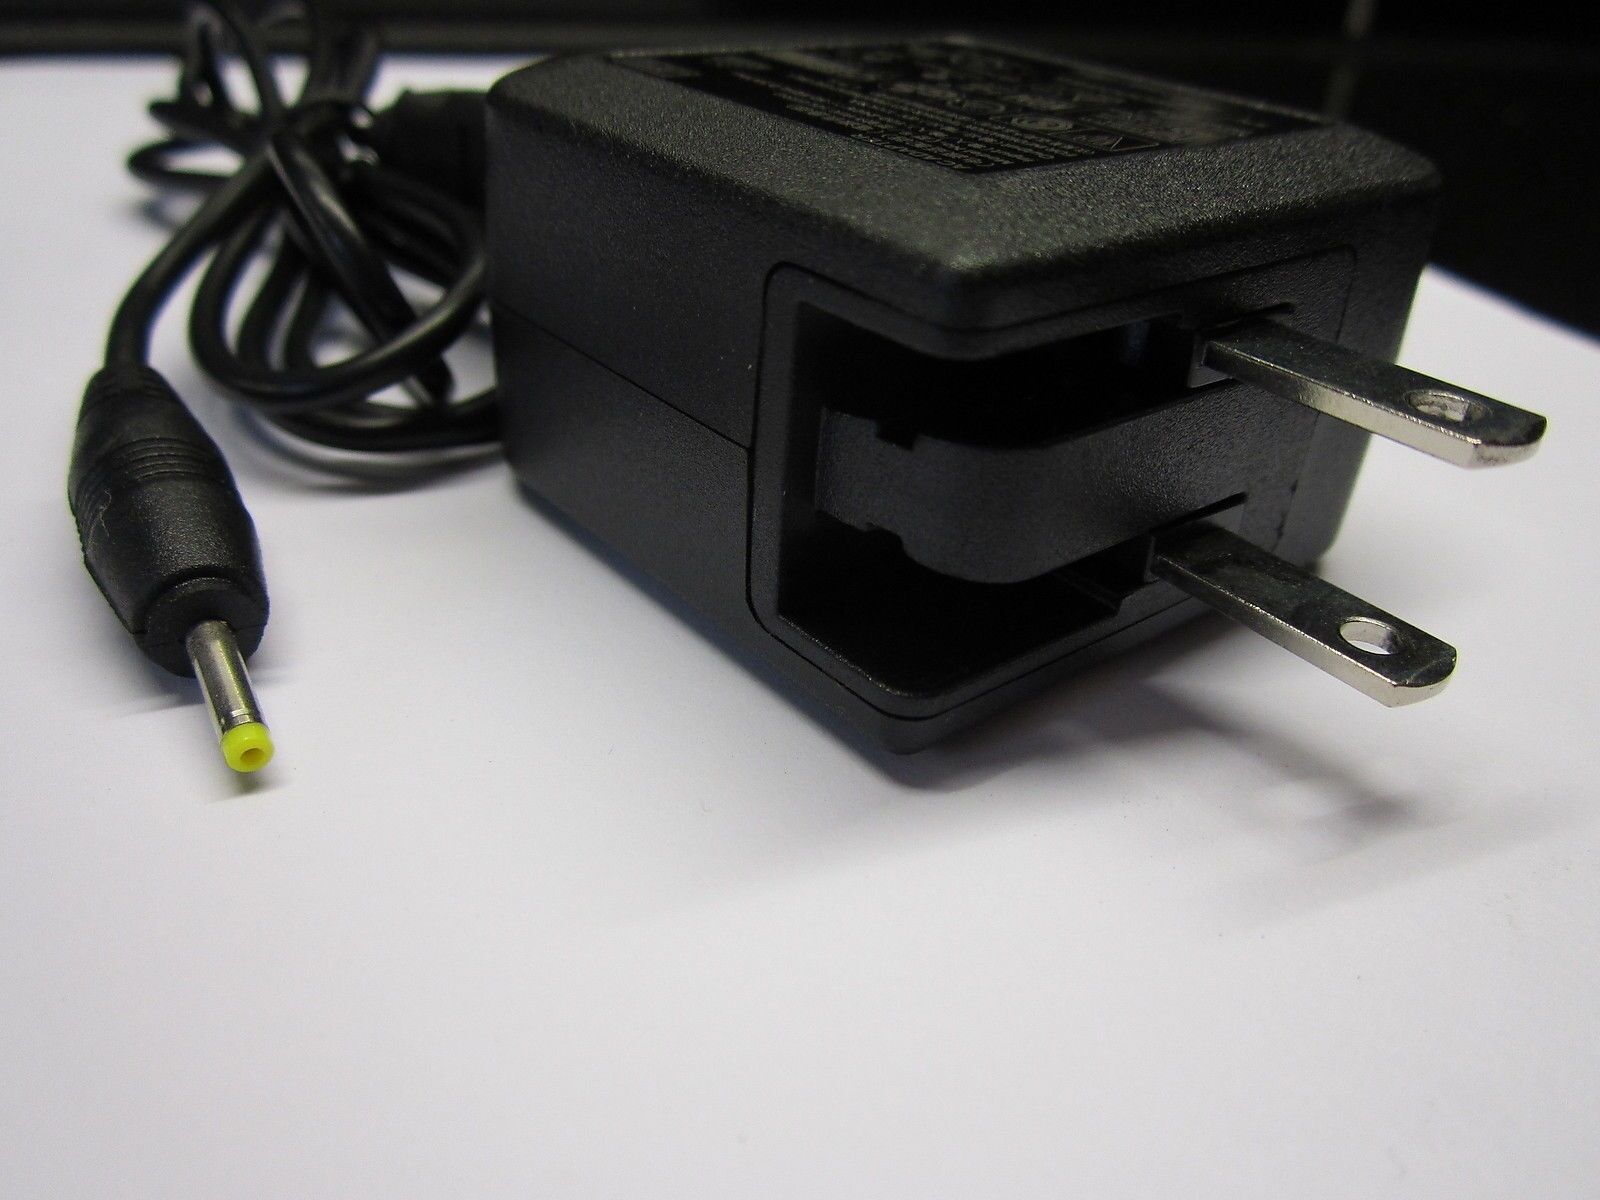 US 5V 2A AC-DC Switching Adapter Charger for 9.7" Scroll Elite Android Tablet PC This is your Chance to Purchase this